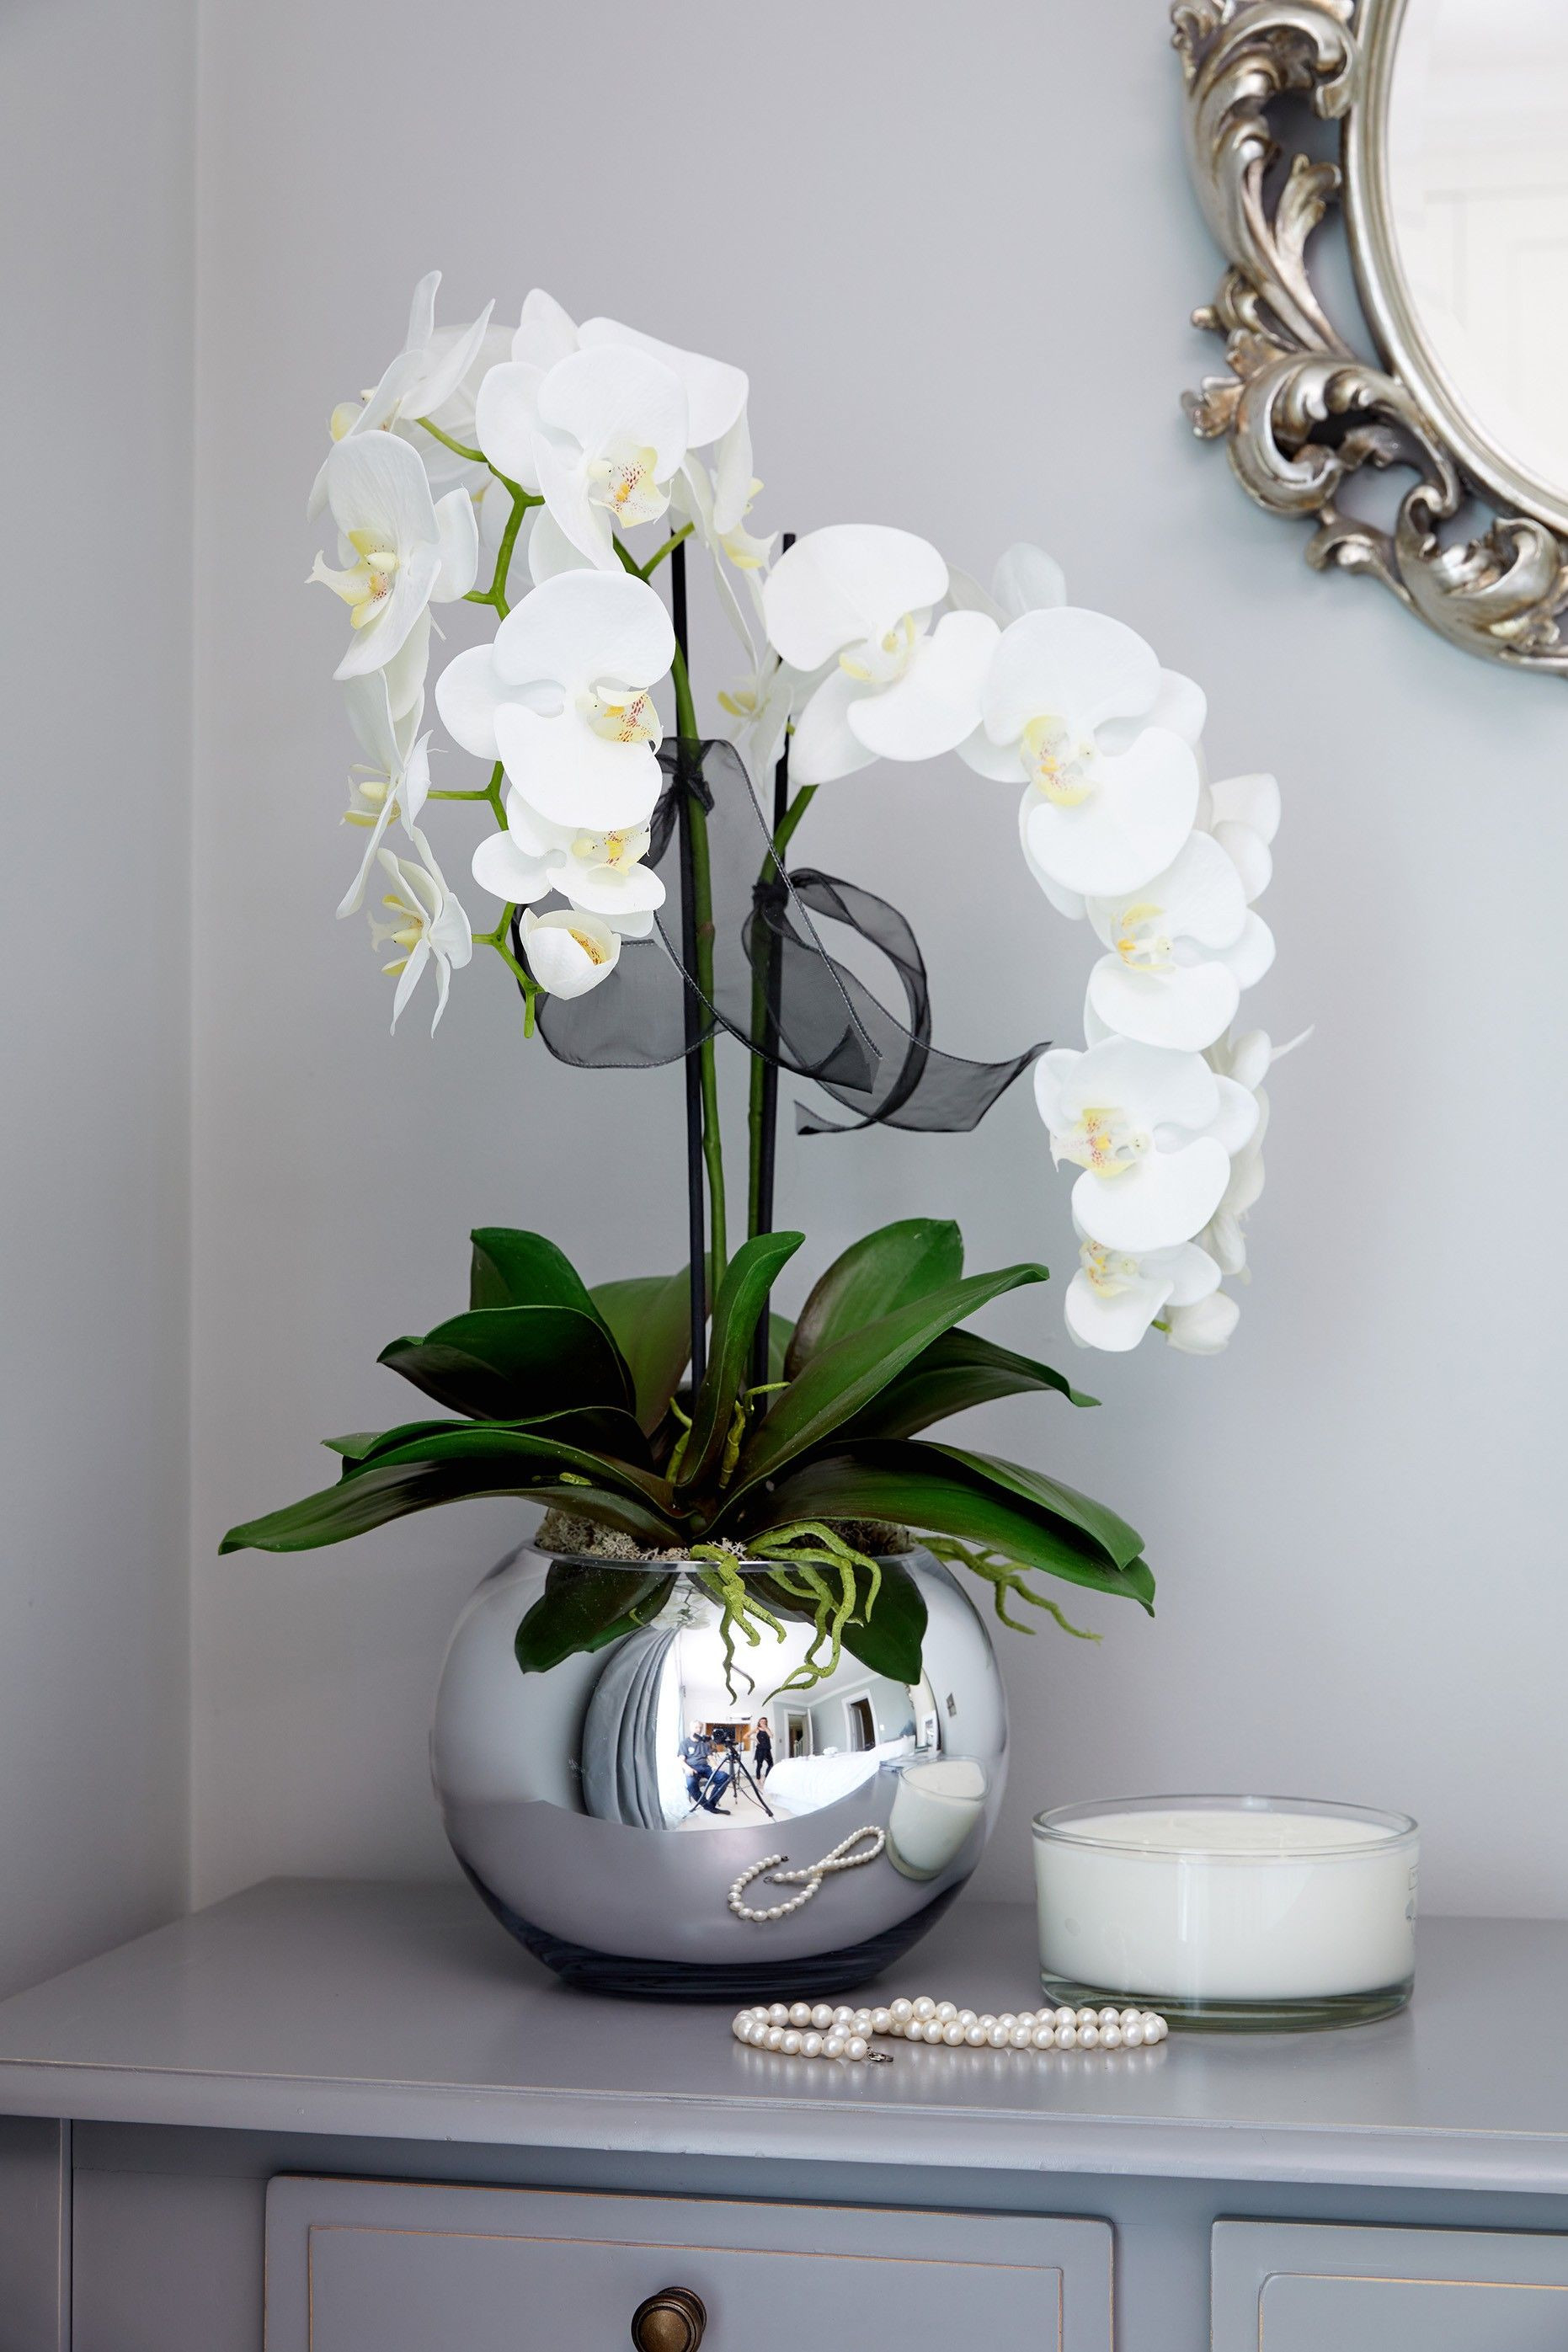 12 Popular where to Buy Silver Vase orchids 2024 free download where to buy silver vase orchids of orchids in a silver goldfish bowl accessories pinterest regarding orchids in a silver goldfish bowl